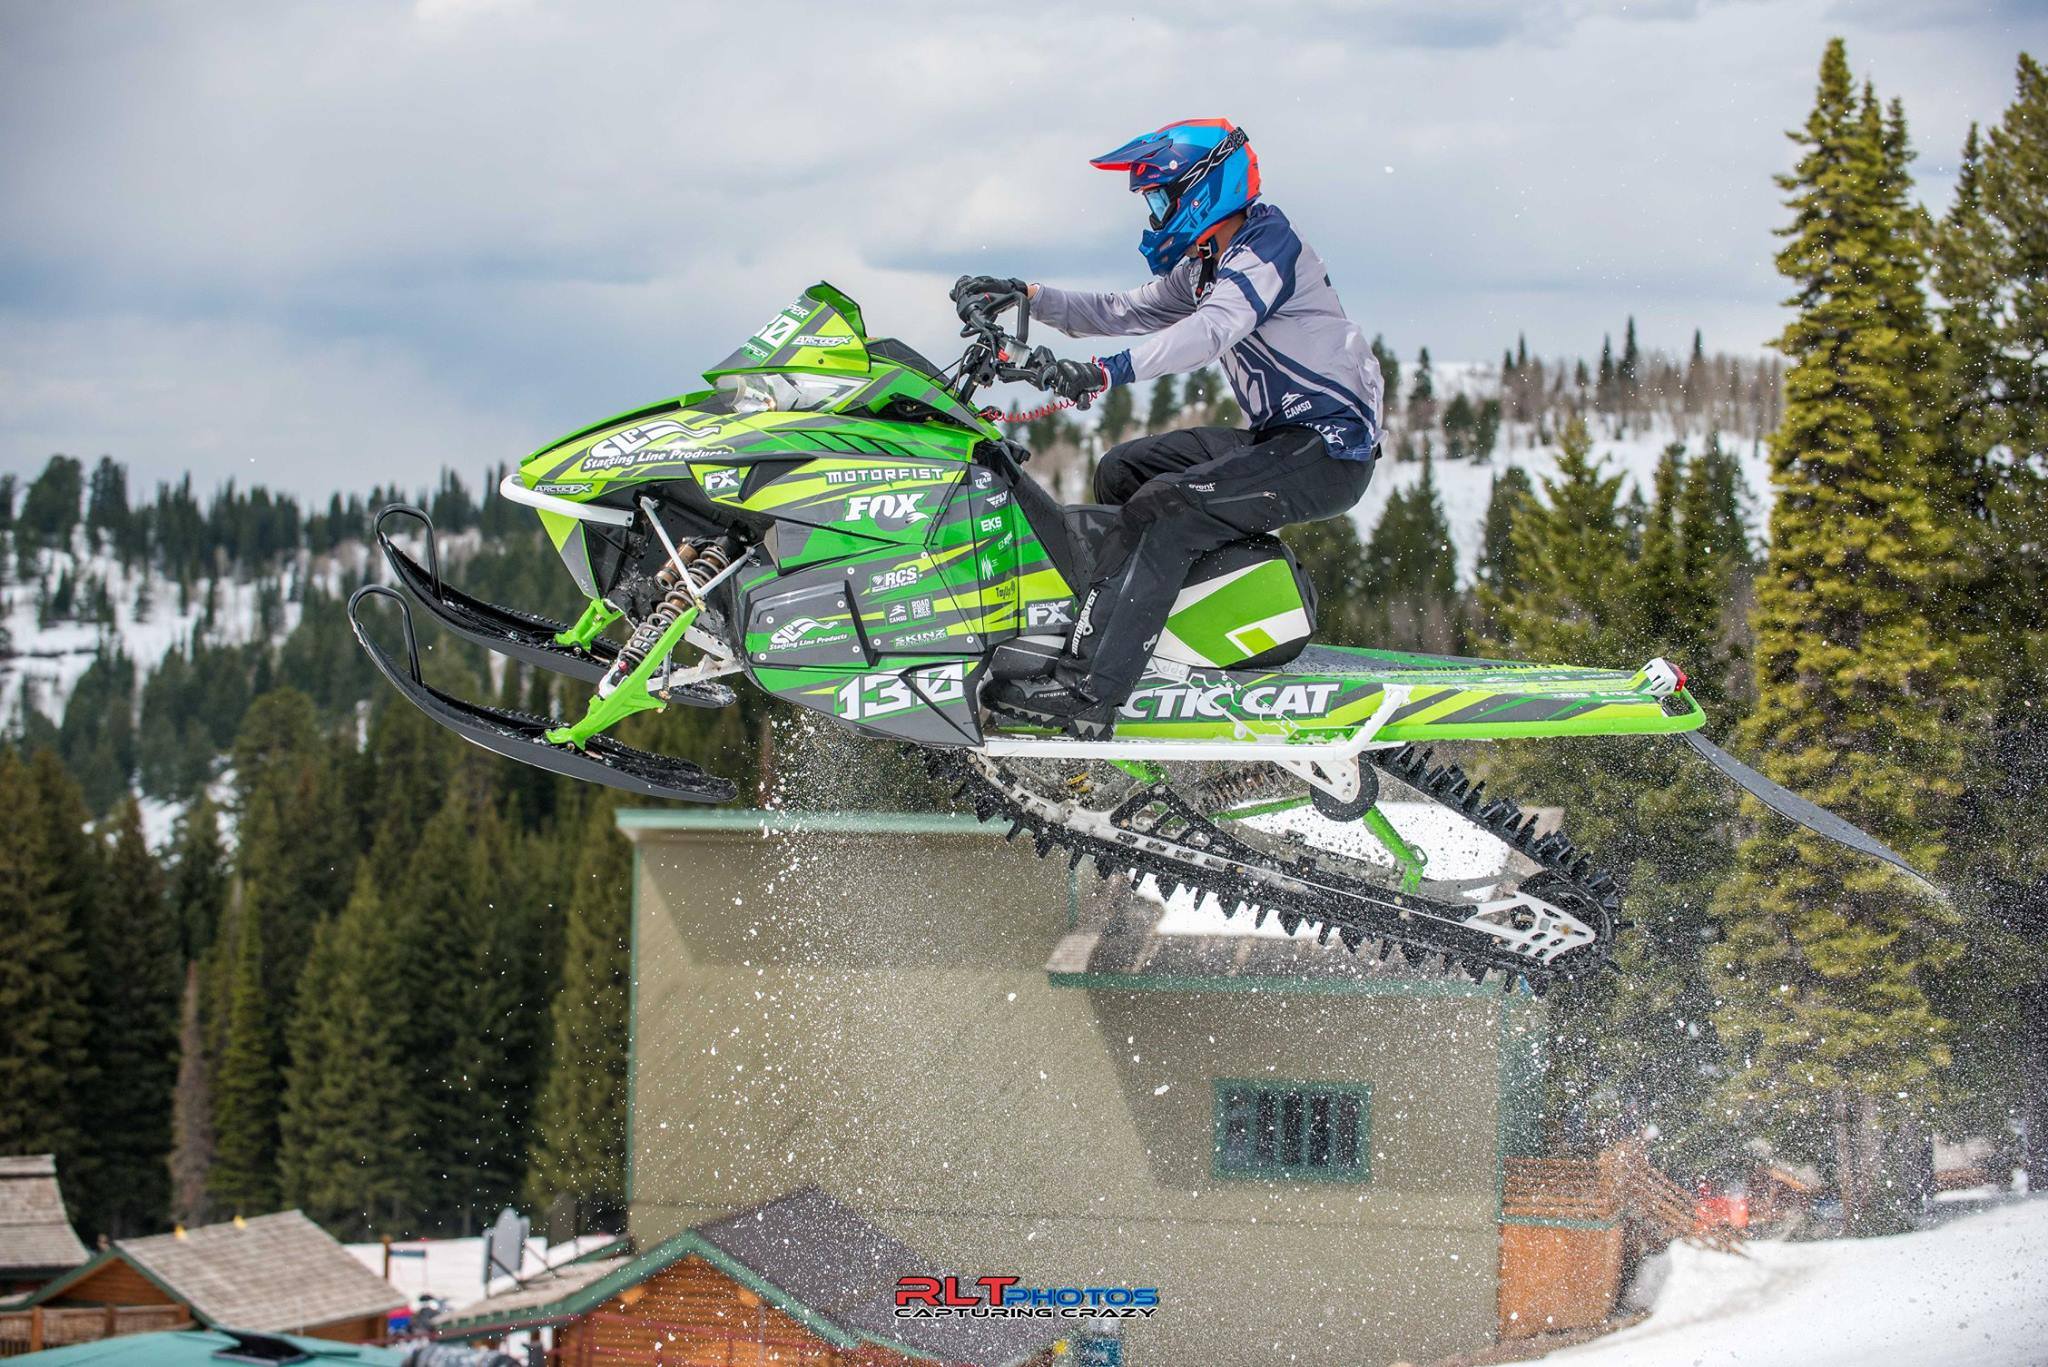 Team Arctic Cat's Trace Tupper wins at Crazy Horse. Photo by RLT.